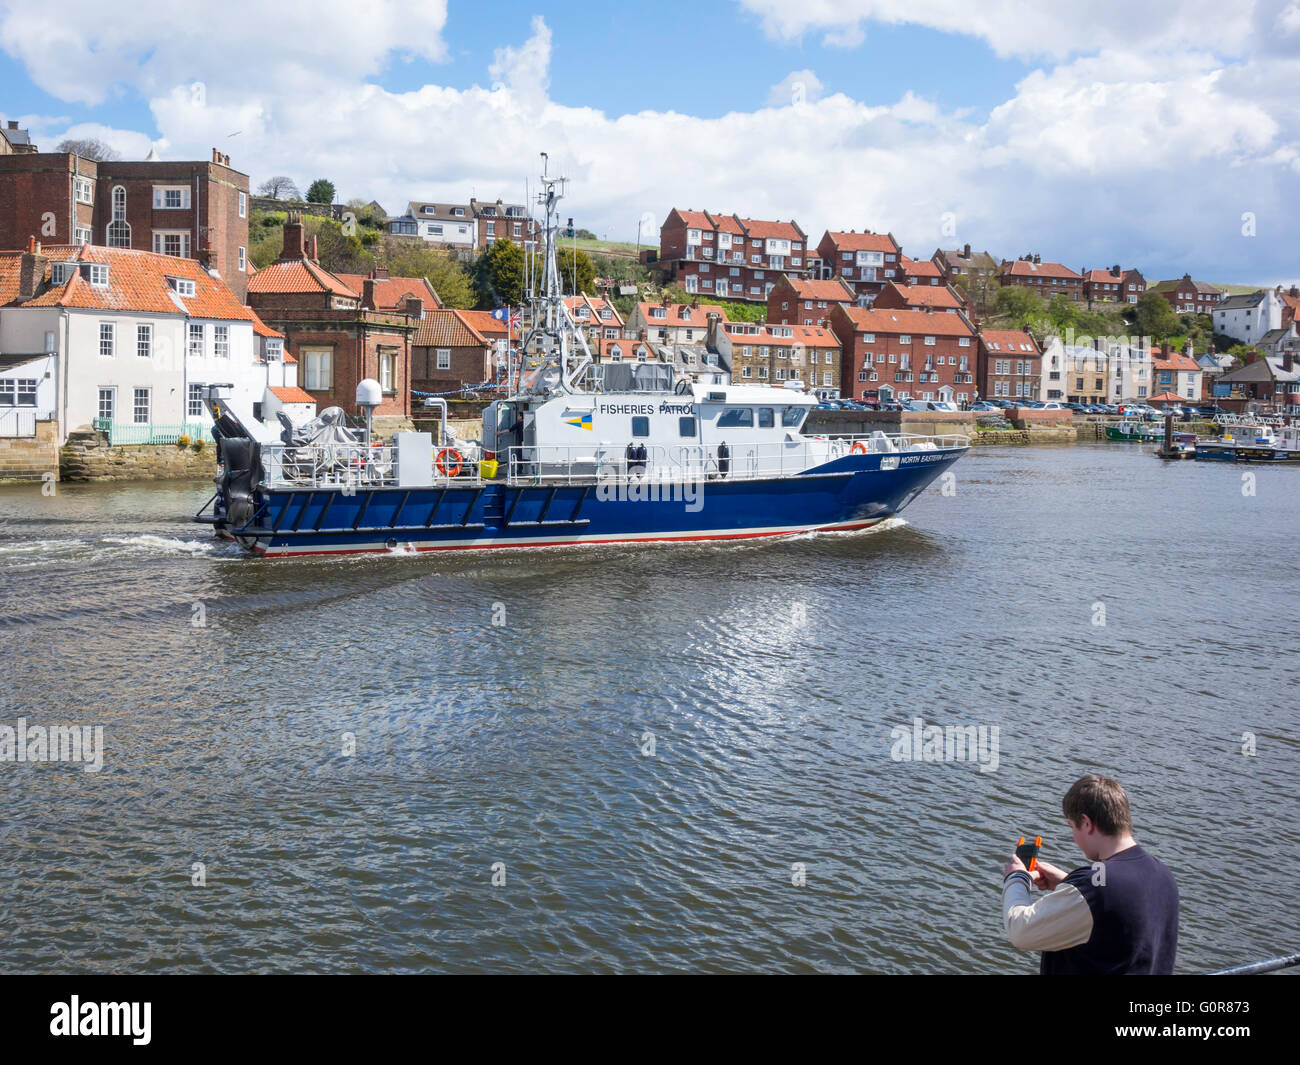 North Eastern Guardian lll fisheries patrol vessel entering Whitby harbour passing a boy fishing with a hand line. Stock Photo